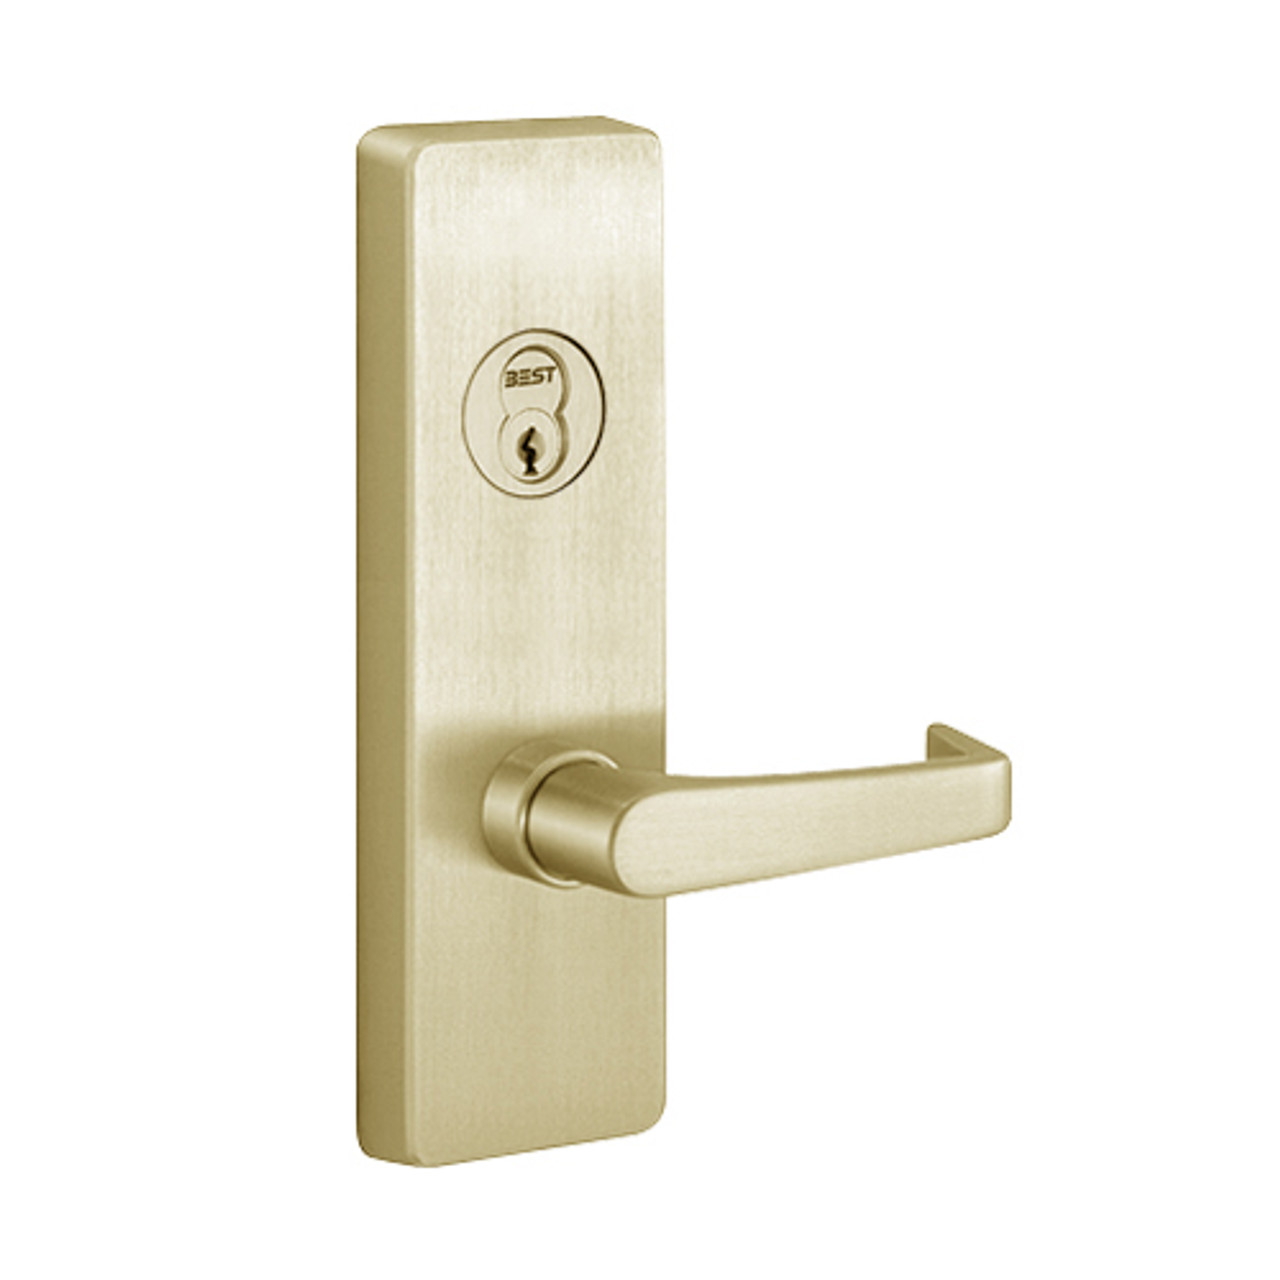 R4903A-606-LHR PHI Key Retracts Latchbolt Retrofit Trim with A Lever Design for Apex and Olympian Series Exit Device in Satin Brass Finish